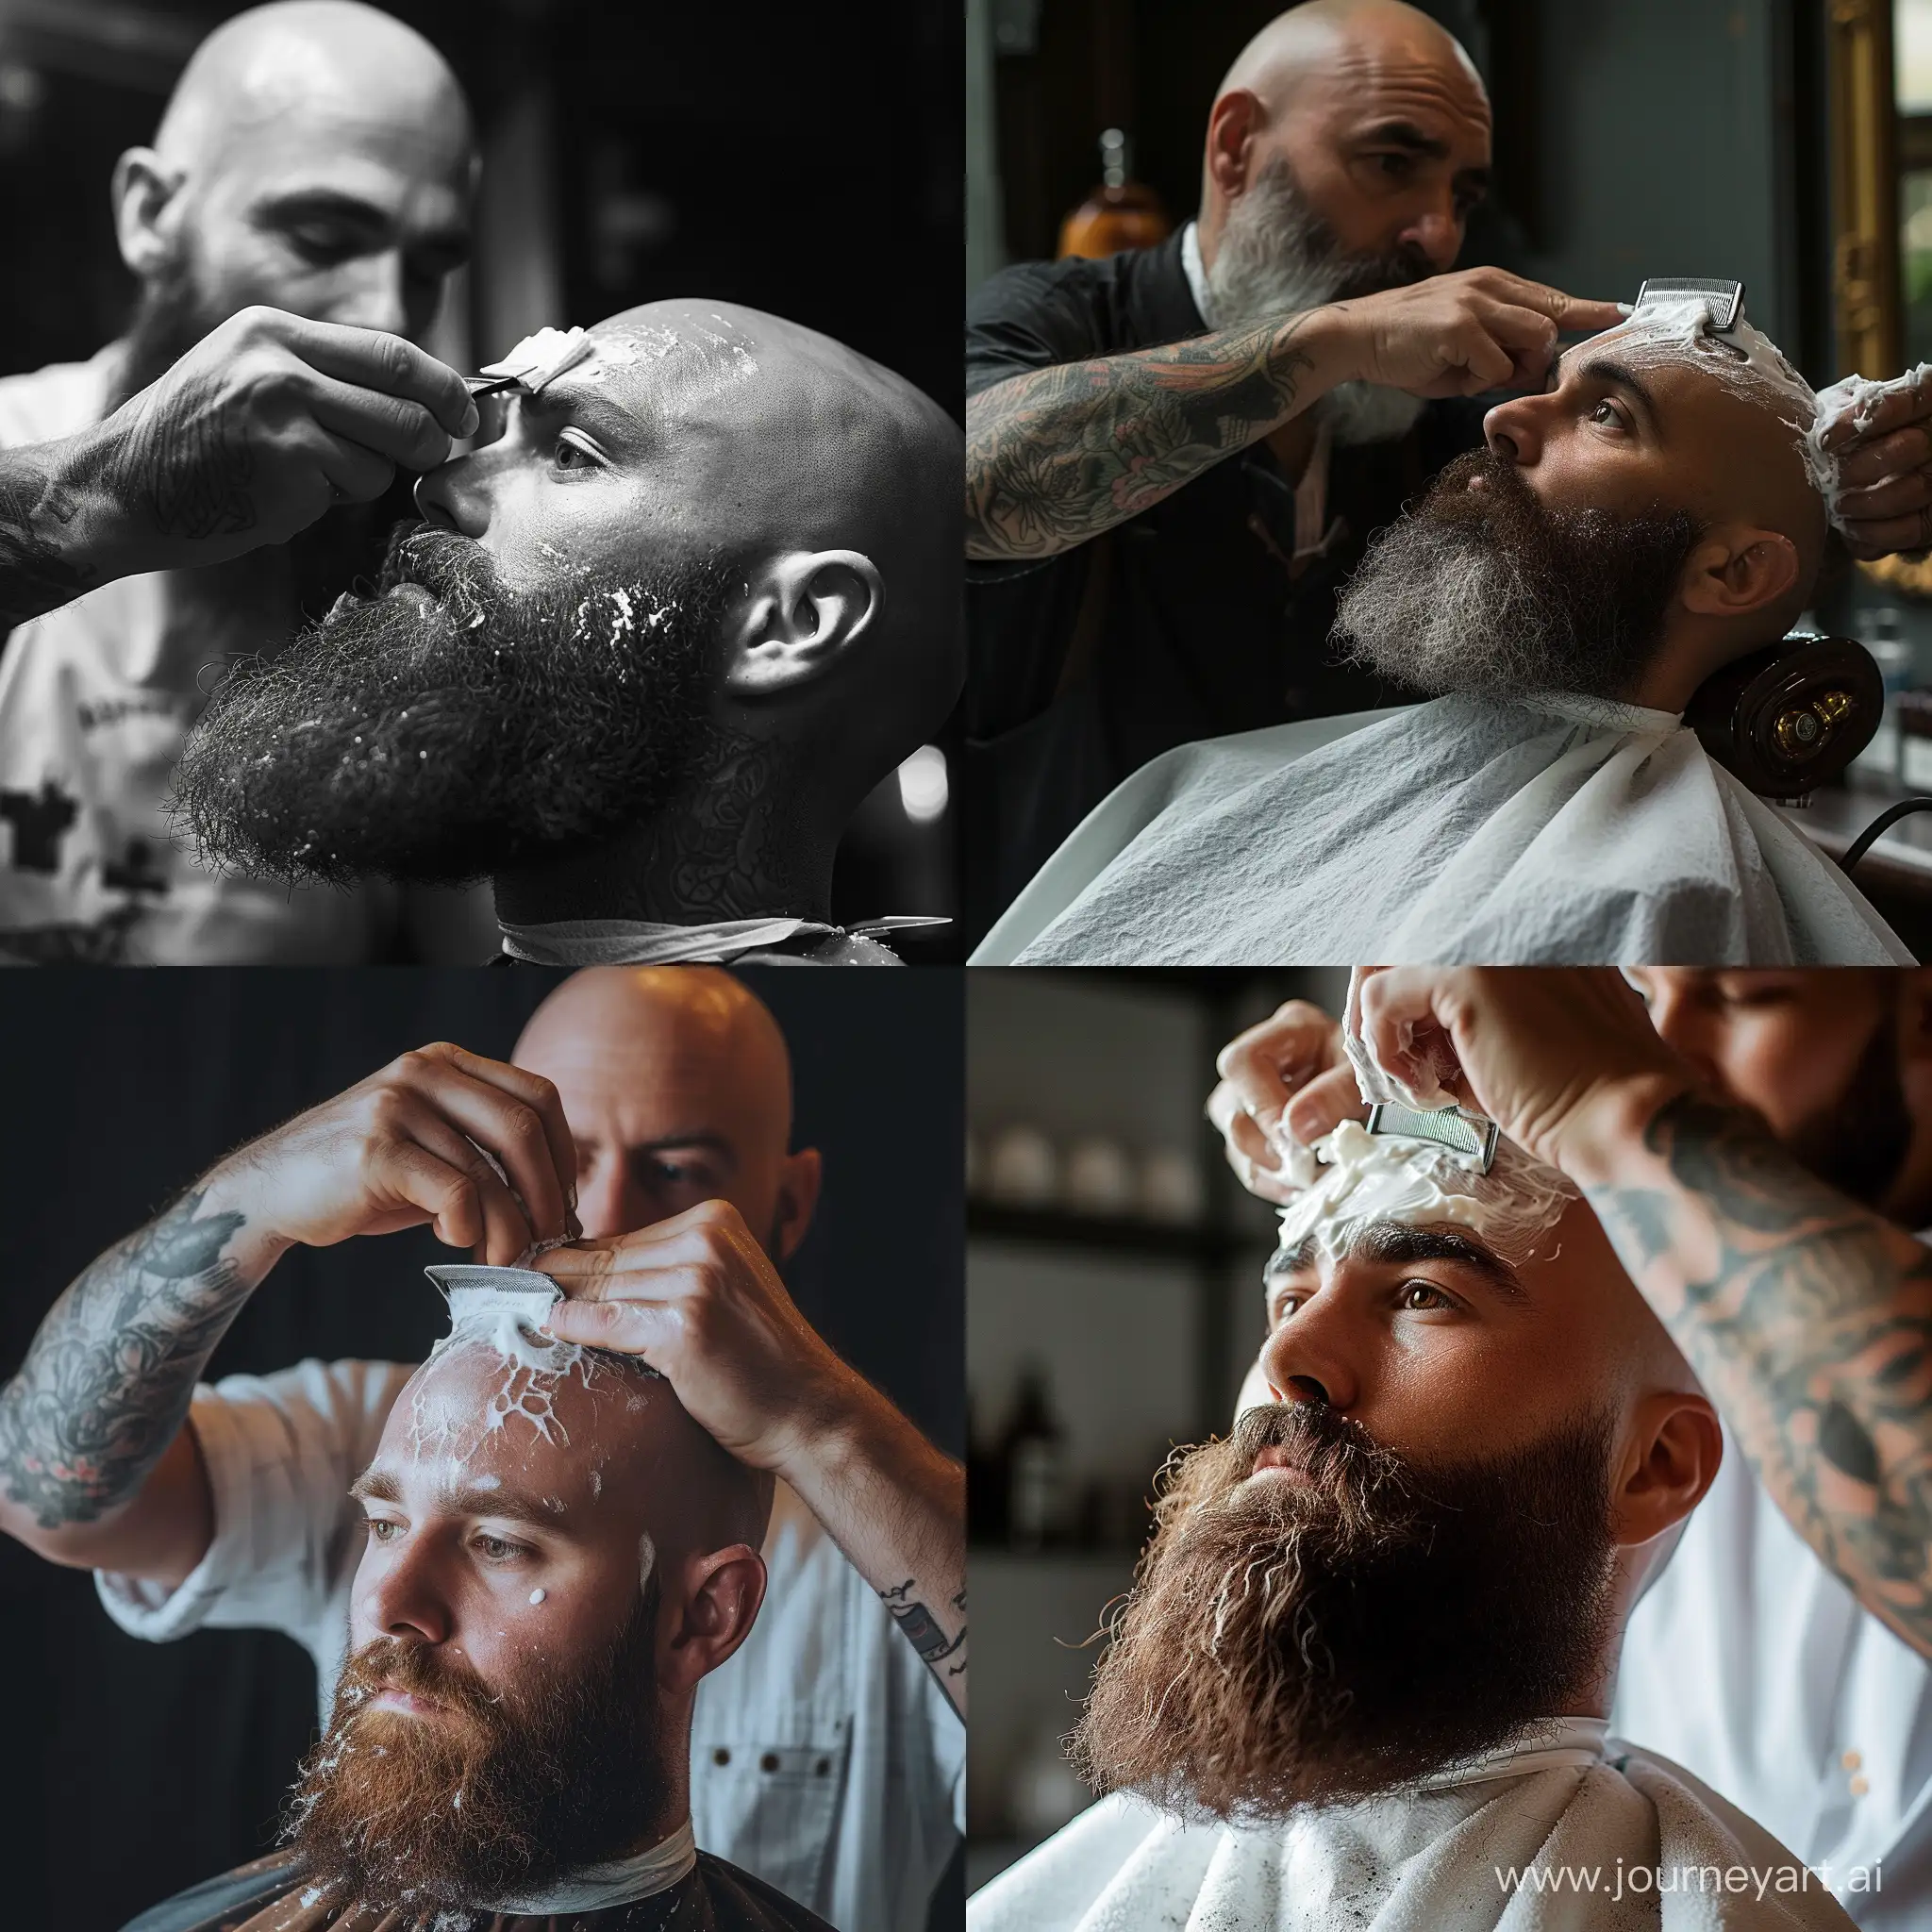 Bearded man getting his head shaved by a bald barber